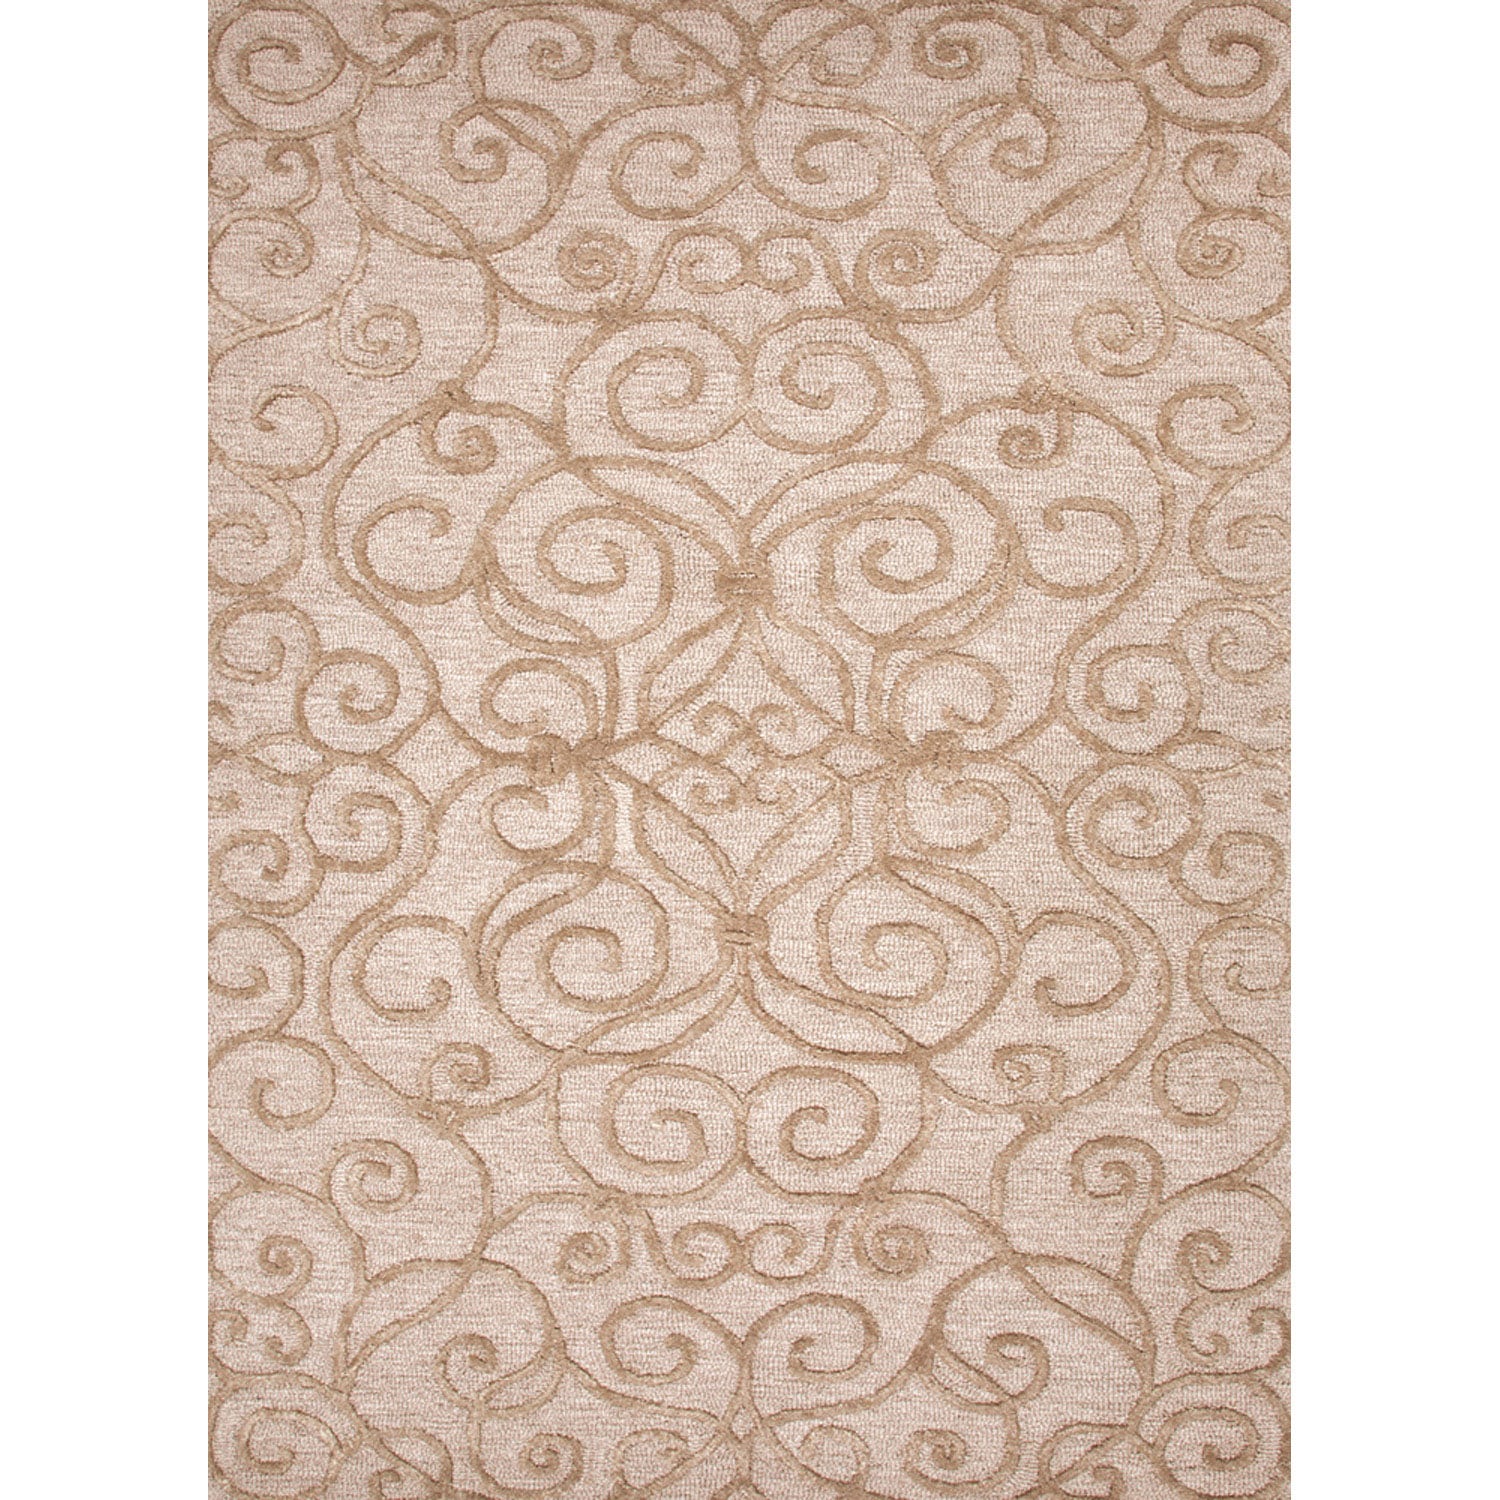 Hand tufted Rectangular Transitional Floral pattern Brown Rug (8 X 11)